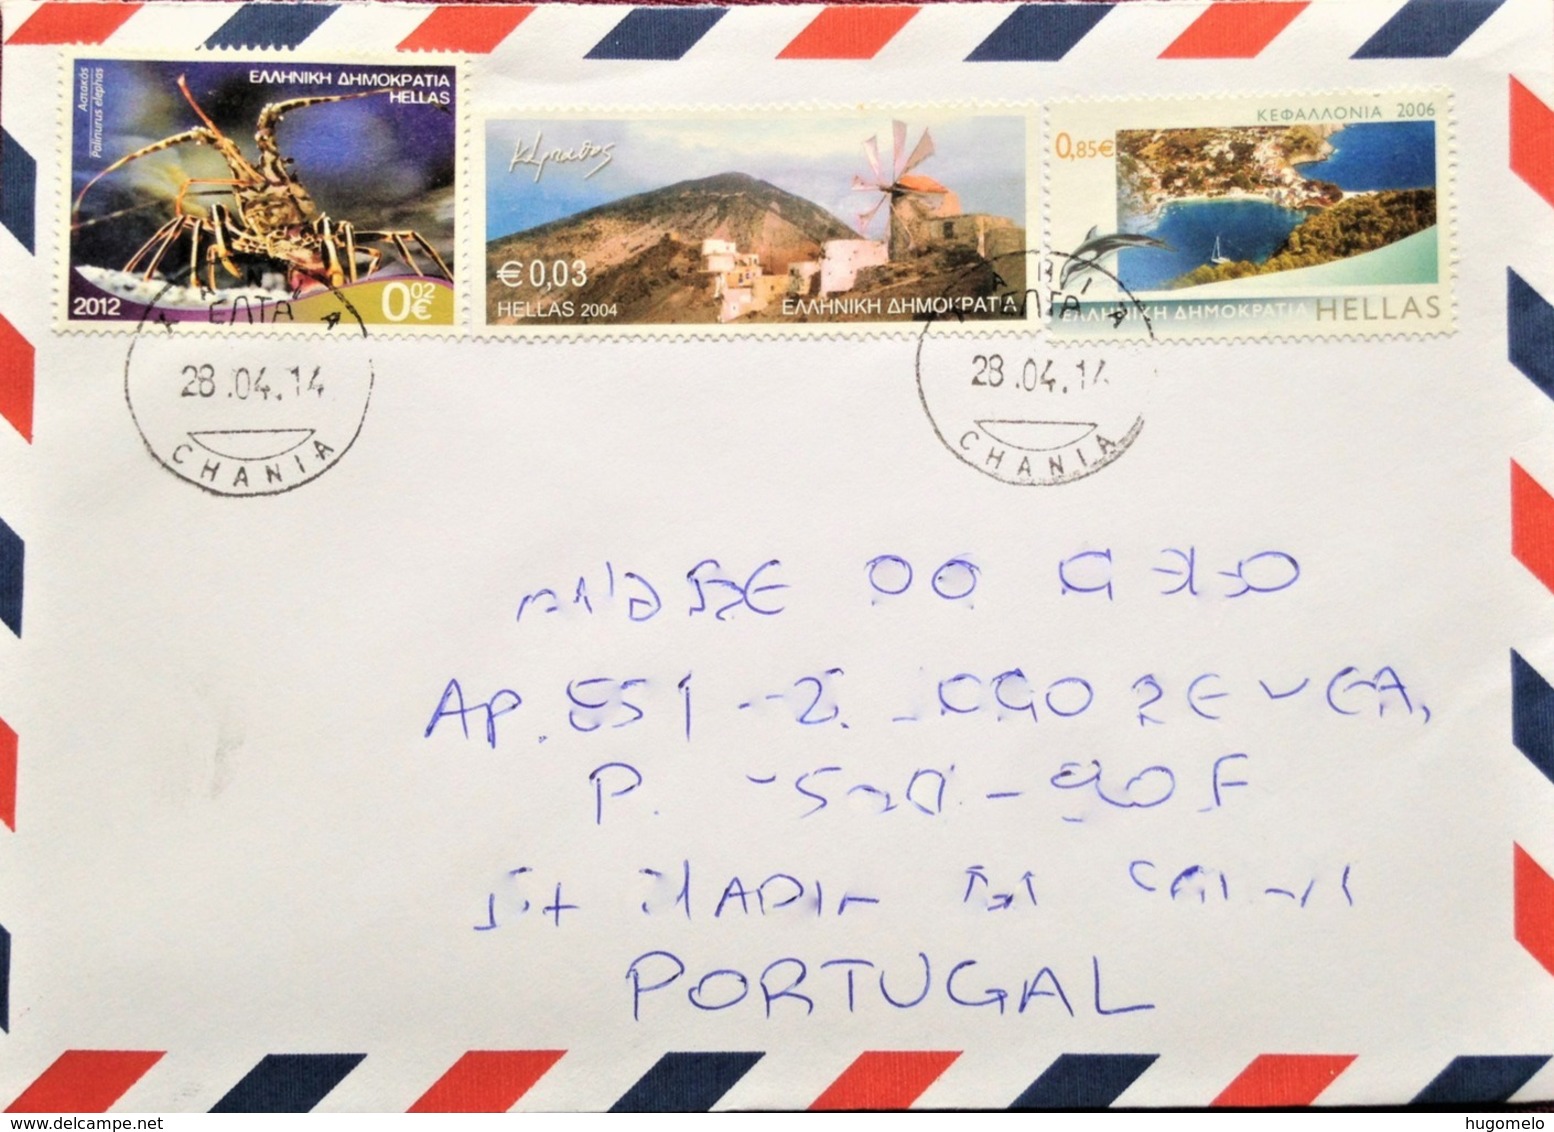 Greece, Circulated Cover To Portugal, "Windmills", "Crustaceans", "Lobsters", "Landscapes", "Kefalonia Island", 2014 - Lettres & Documents